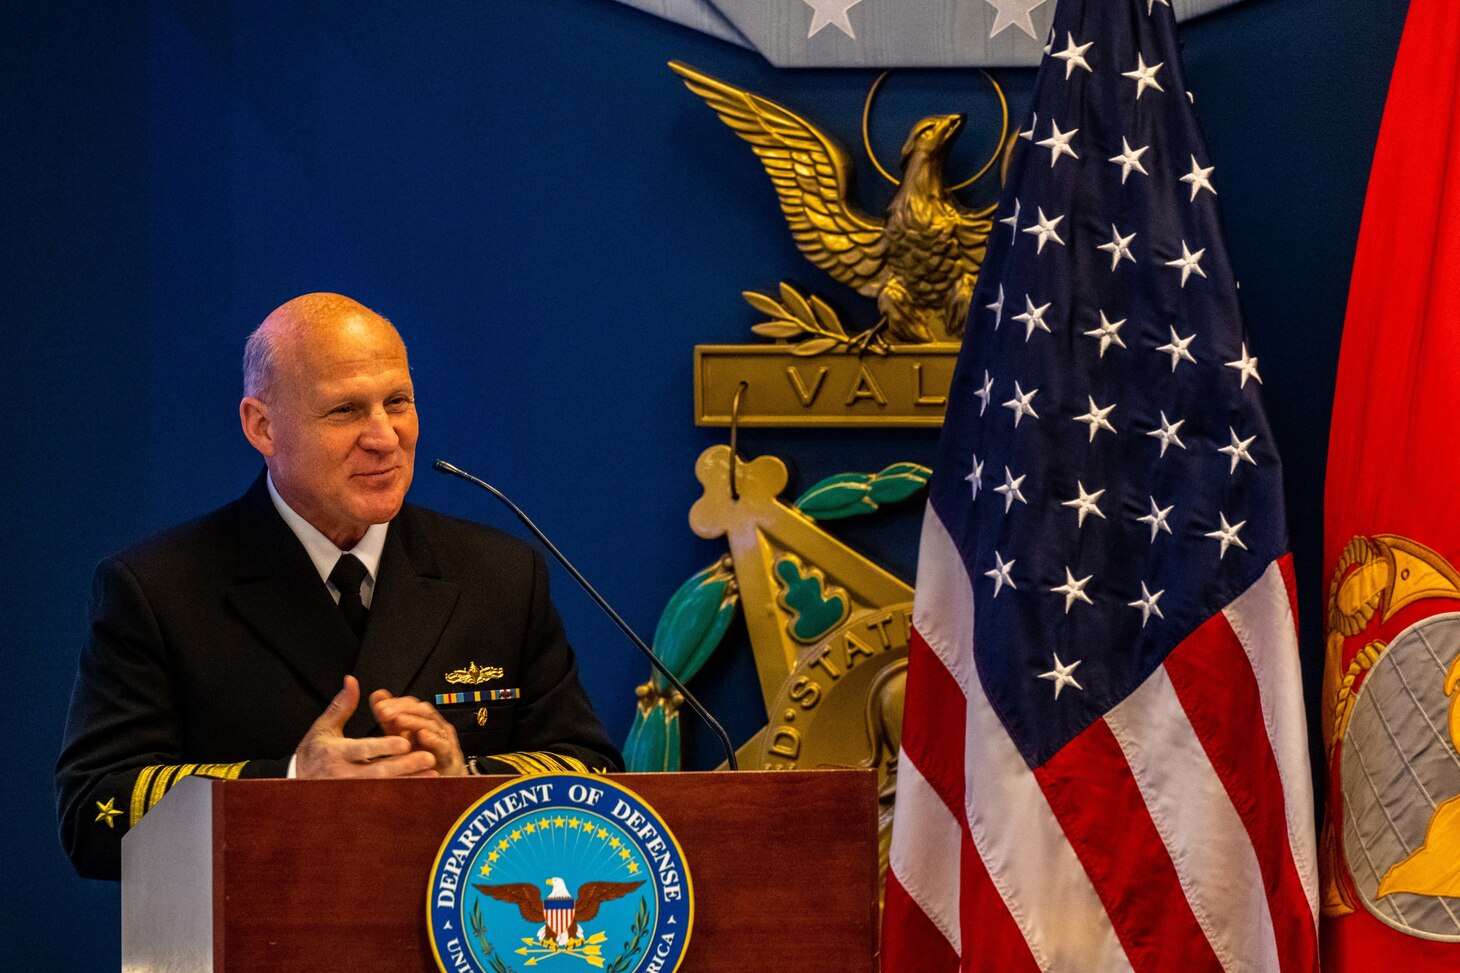 Chief of Naval Operations Adm. Mike Gilday gives remarks before presenting Capt. Adam J. Thomas, former commanding officer, Ohio-class ballistic-missile submarine USS Alaska (SSBN 732) (Gold), and Cmdr. John W. Keefe, commanding officer, Explosive Ordnance Disposal Mobile Unit Five (EODMU 5), with the 2022 Vice Admiral James Bond Stockdale Leadership Award during a ceremony held in the Hall of Heroes at the Pentagon, November 17, 2022.